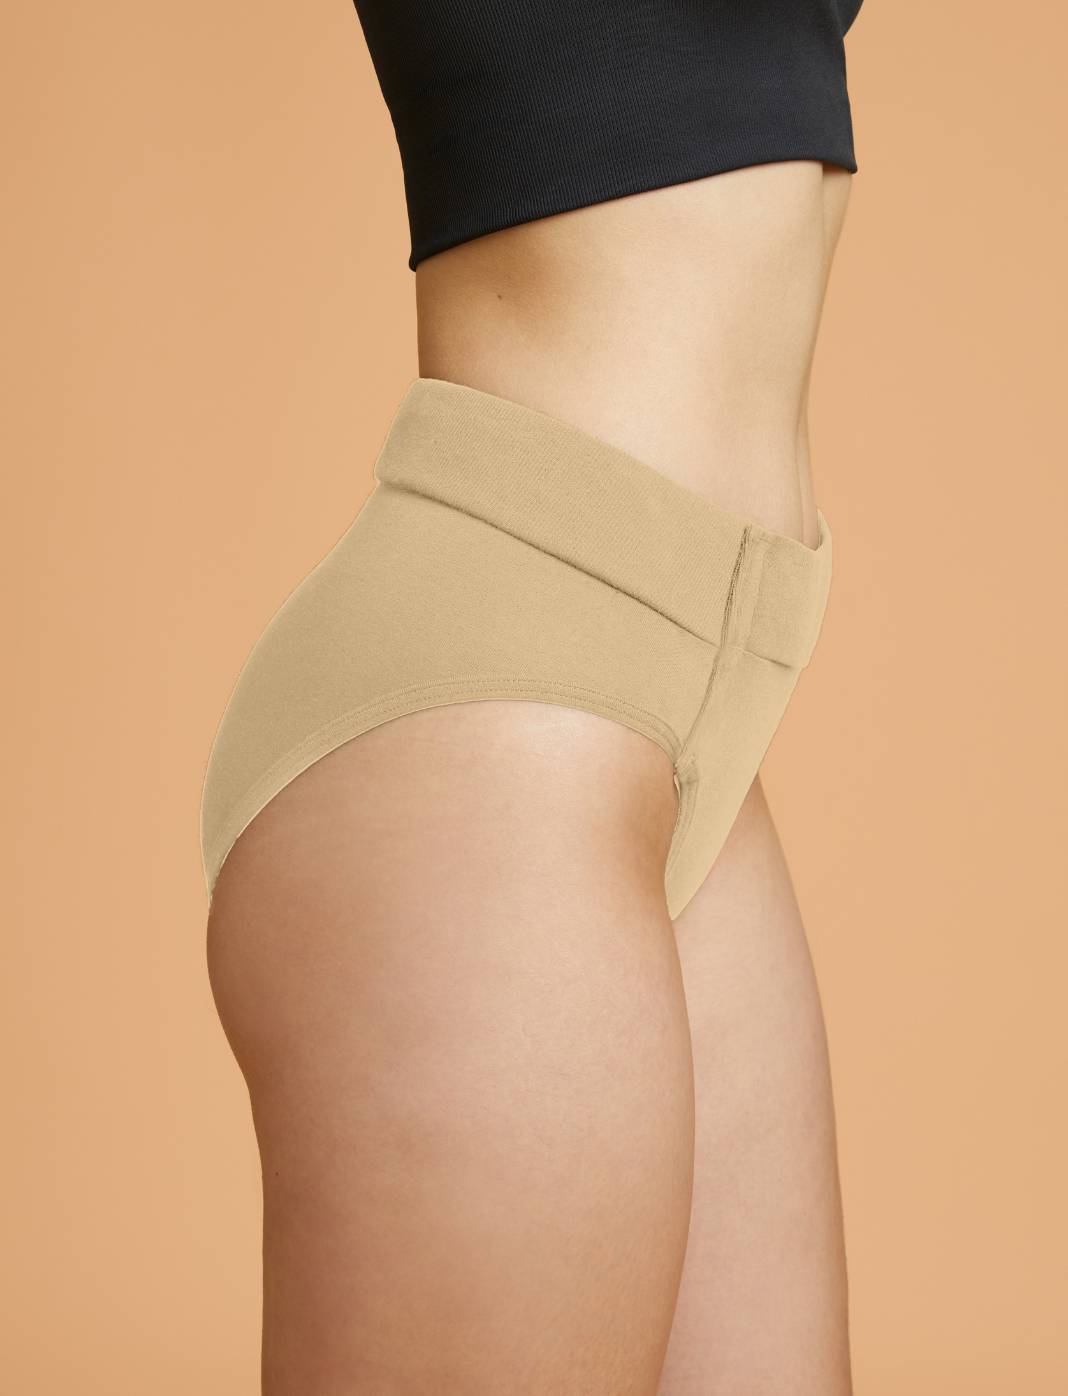 Adaptive Highwaist VELCRO® Panty, For Women with Disabilities